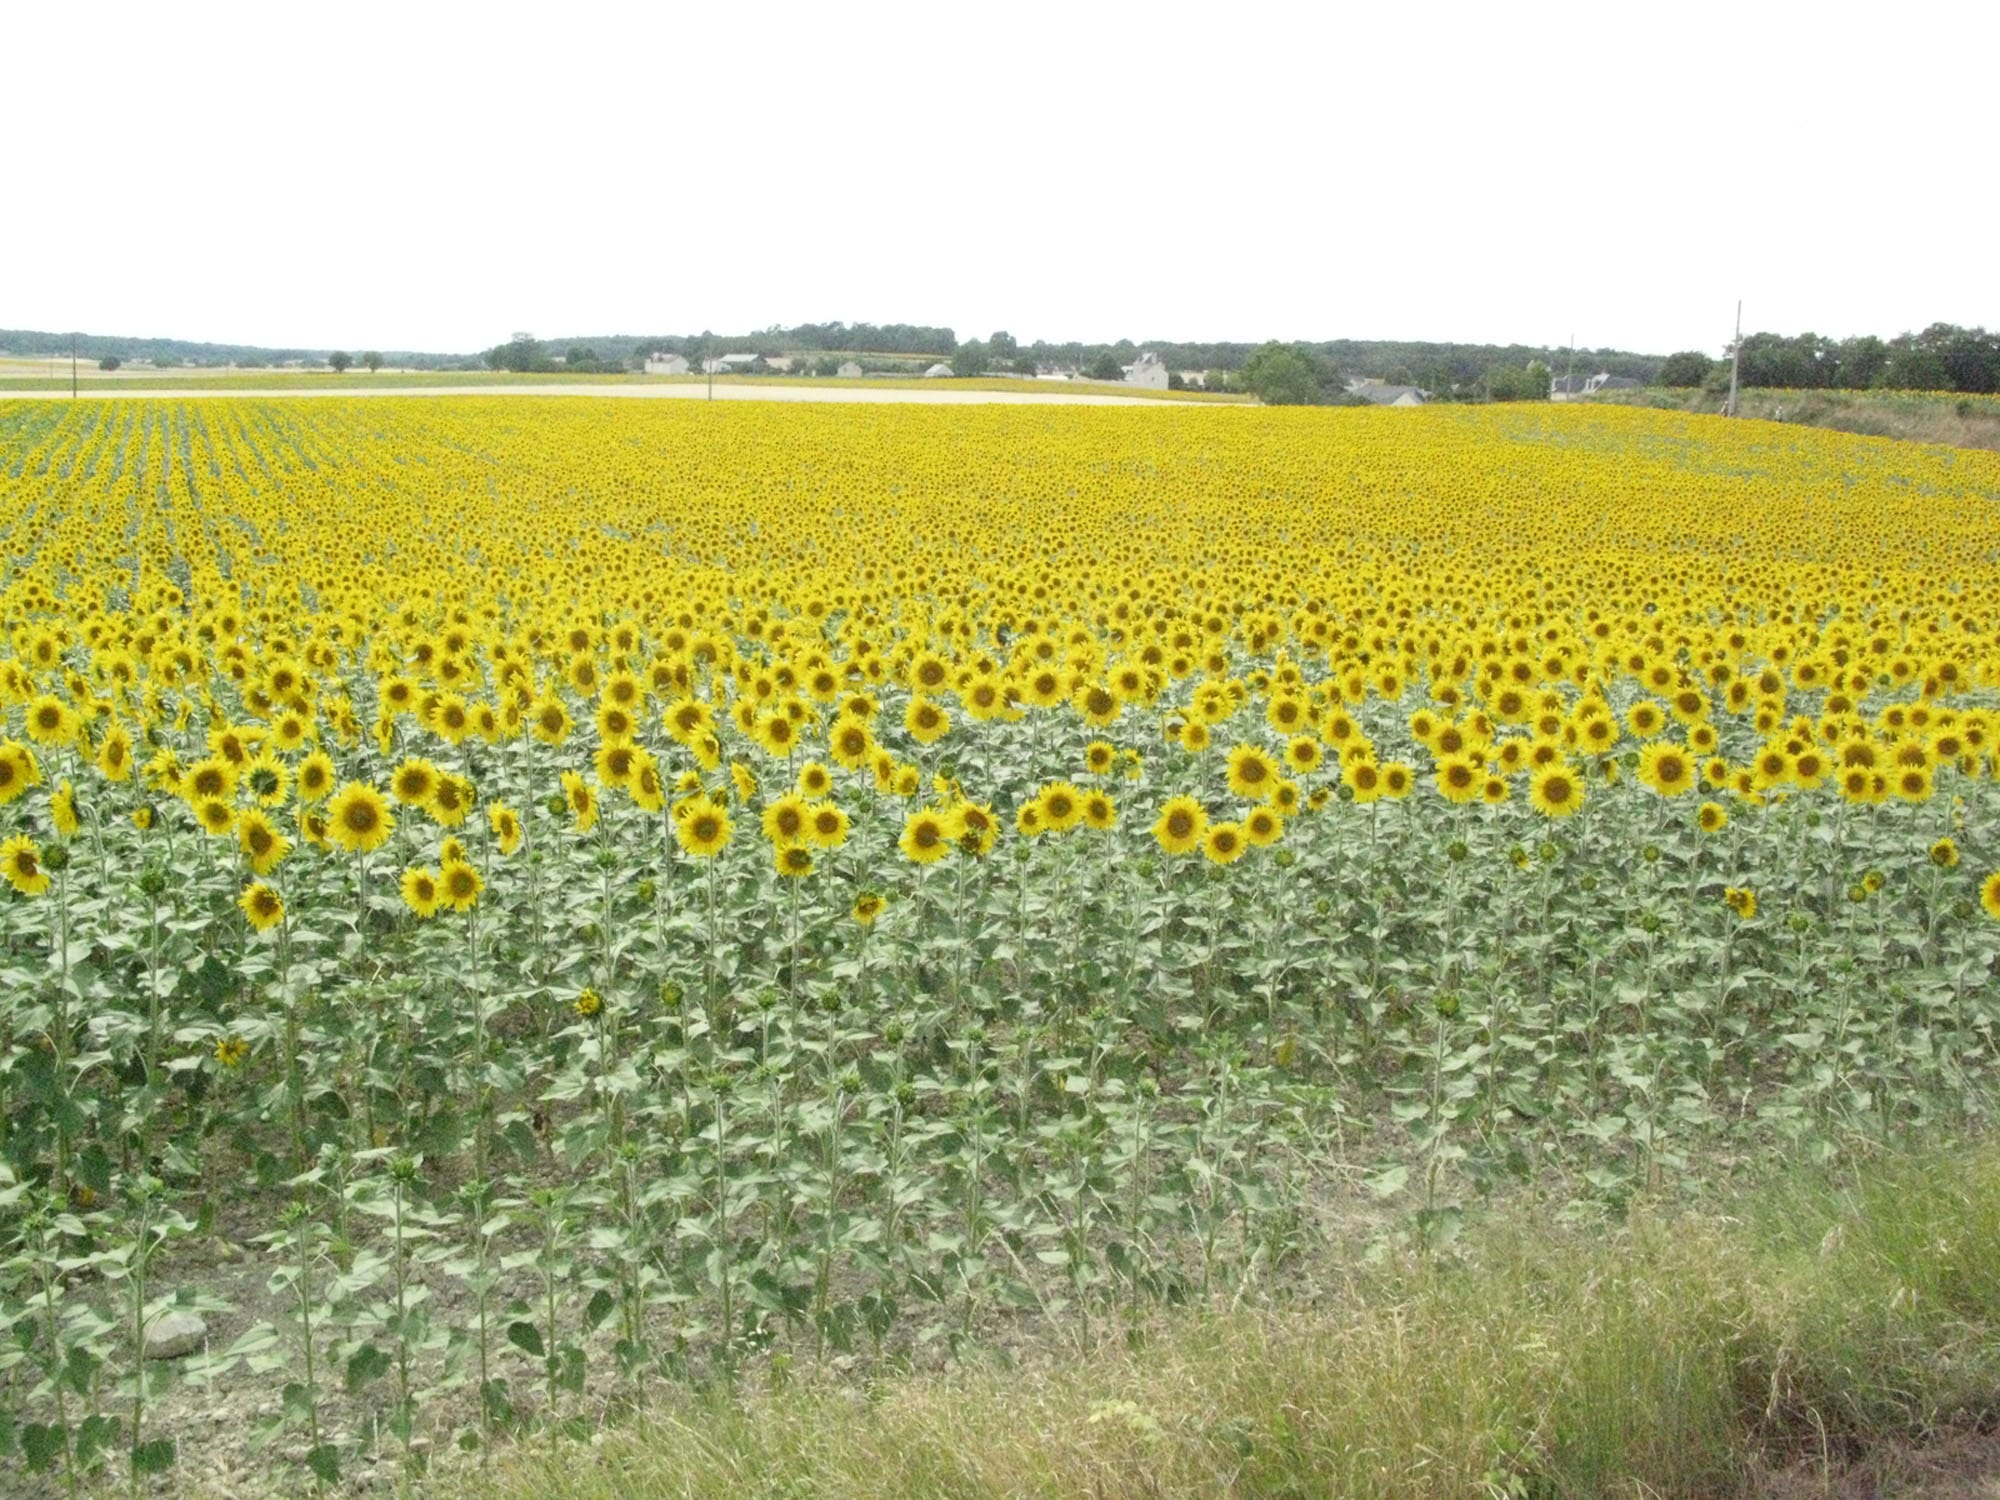 Sunflowers in the Loire Valley,©2011 Patrick Hudgell